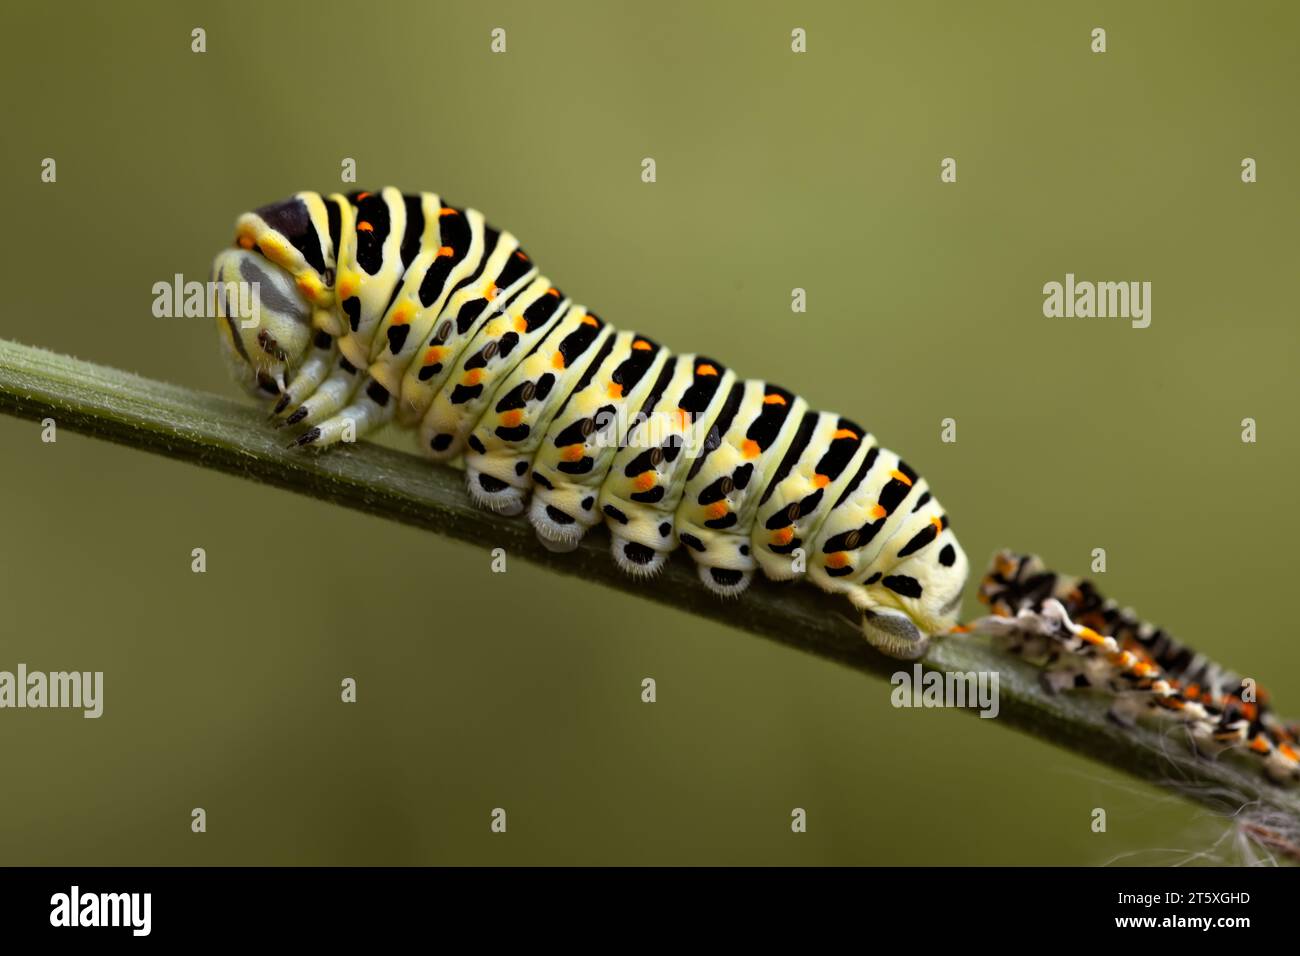 papilio machaon caterpillar perched on a twig for the chrysalis phase, with a deceased companion behind. horizontal and copy space. green background. Stock Photo